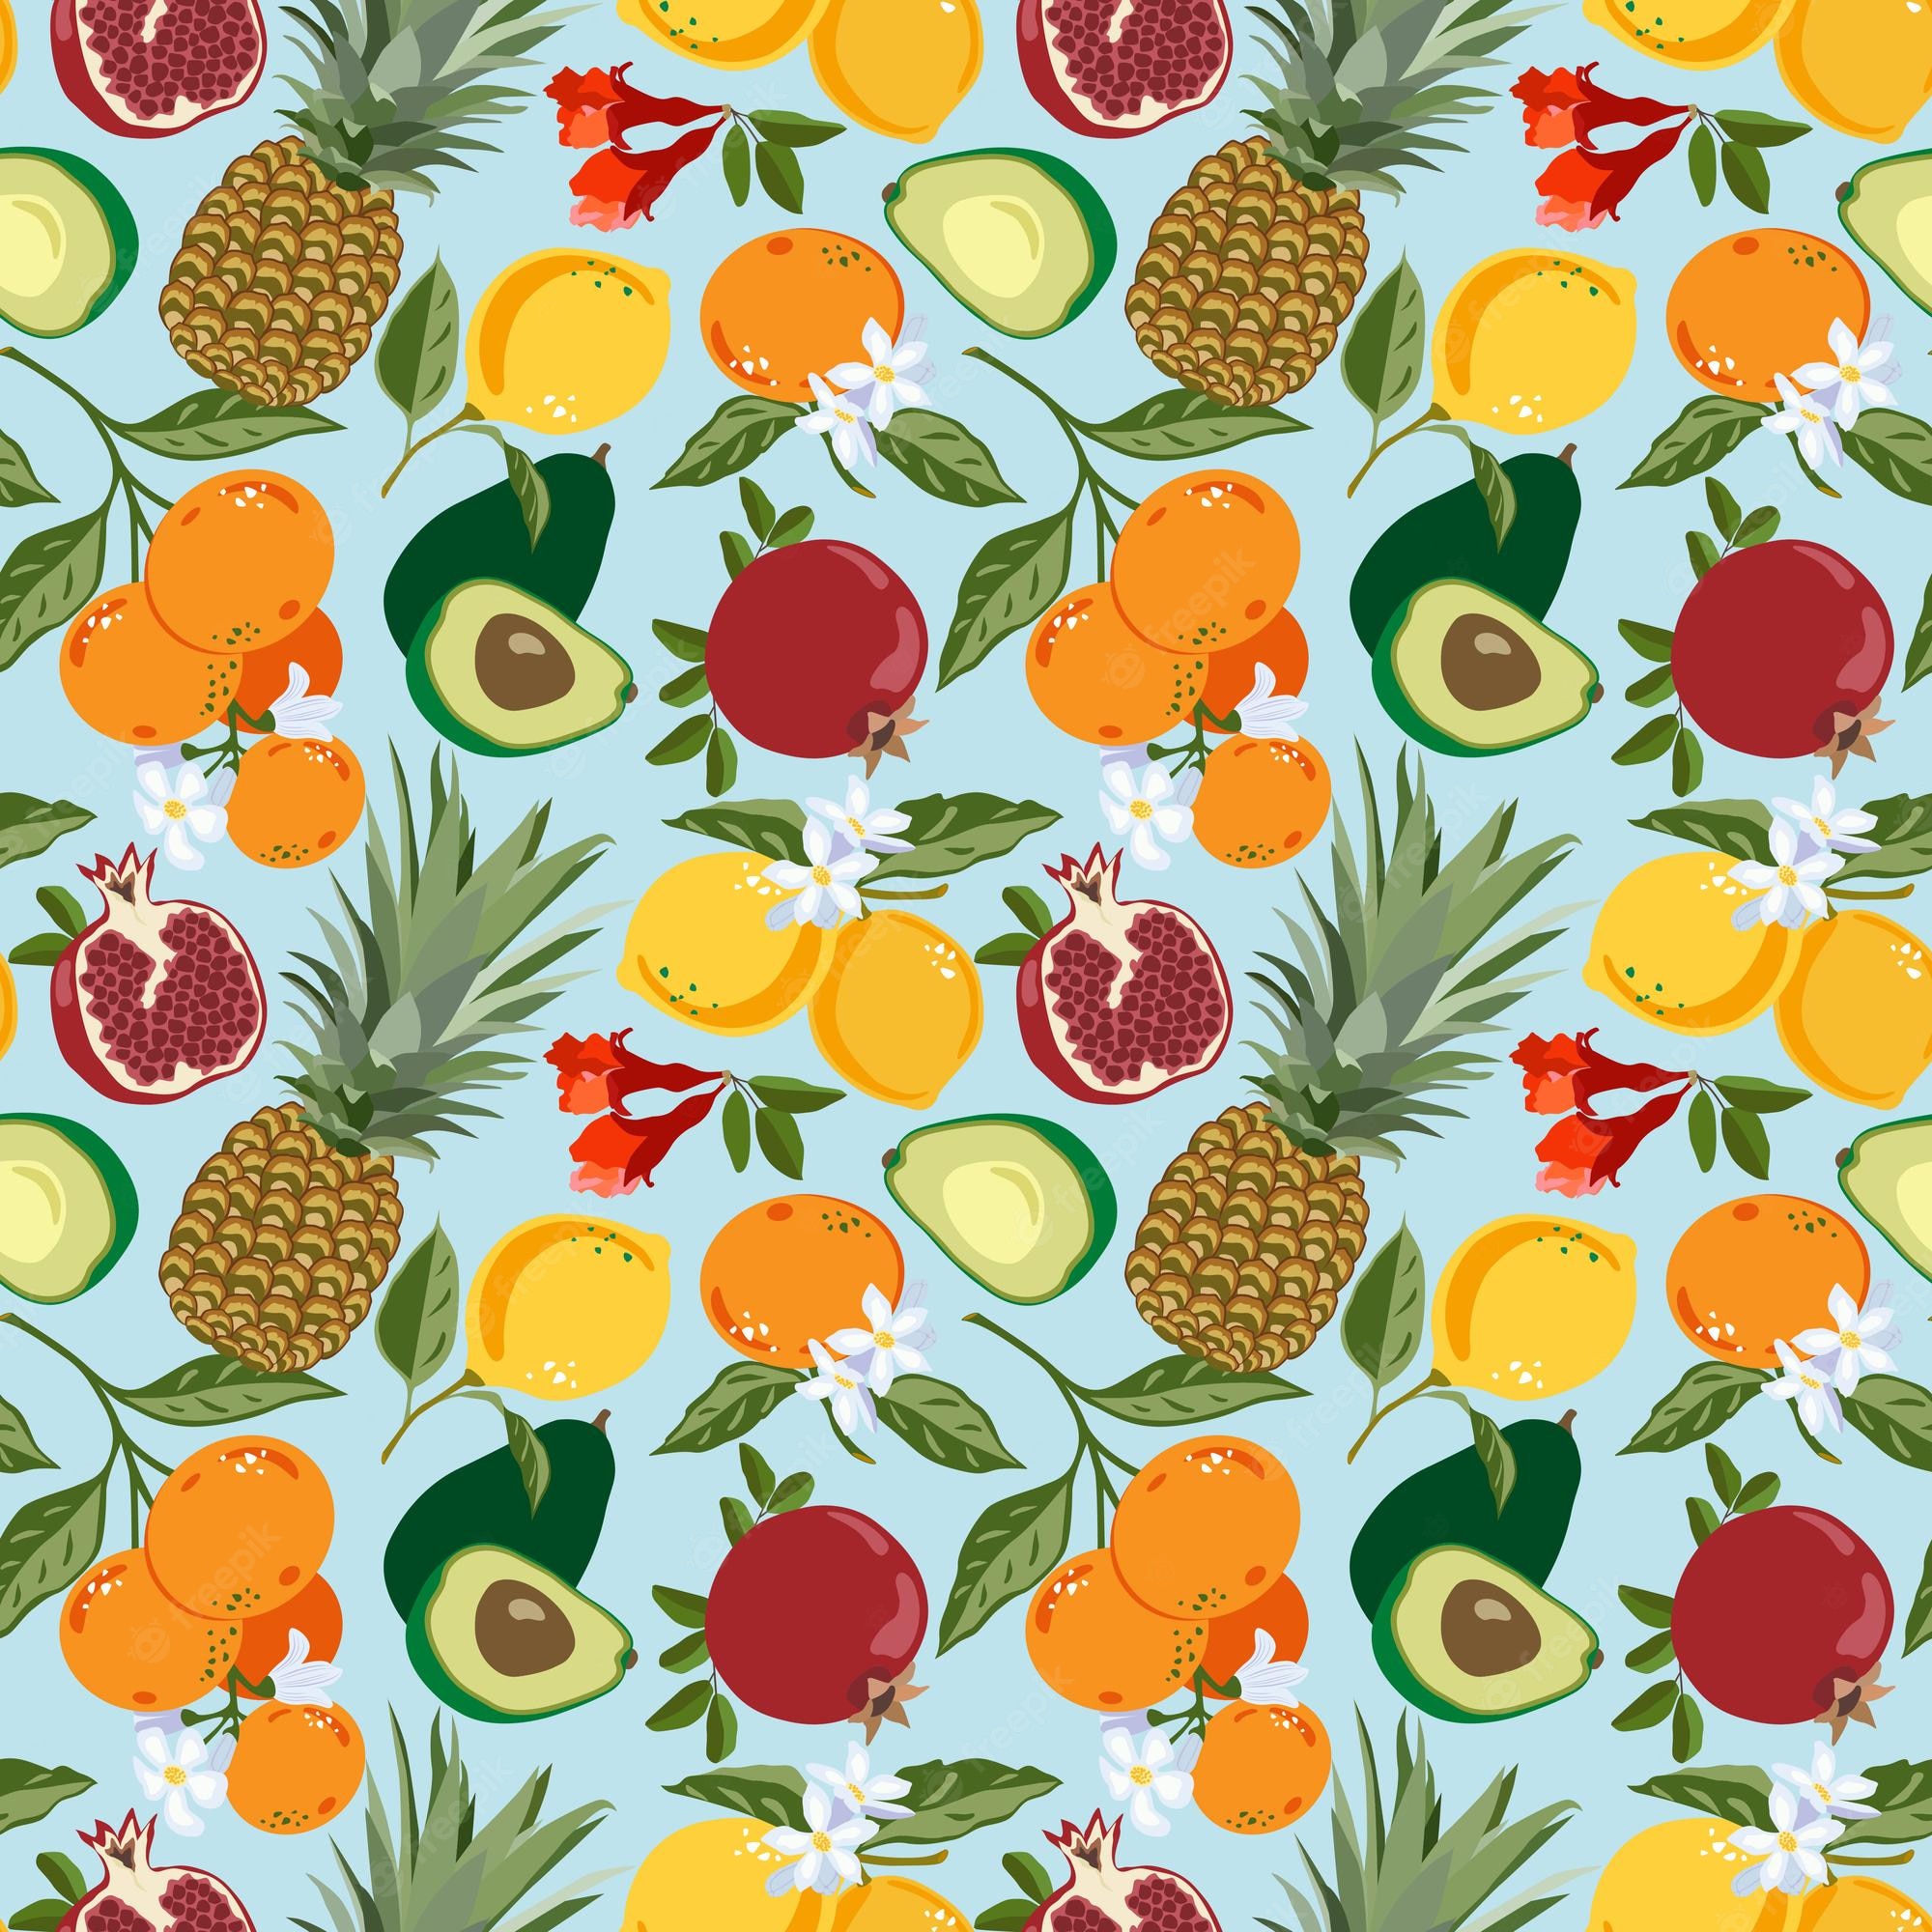 Premium Vector. Seamless pattern with mix of tropical fruits and flowers pineapples pomegranates lemons orange tangerines cute vector pastel background bright illustration of summer fruits